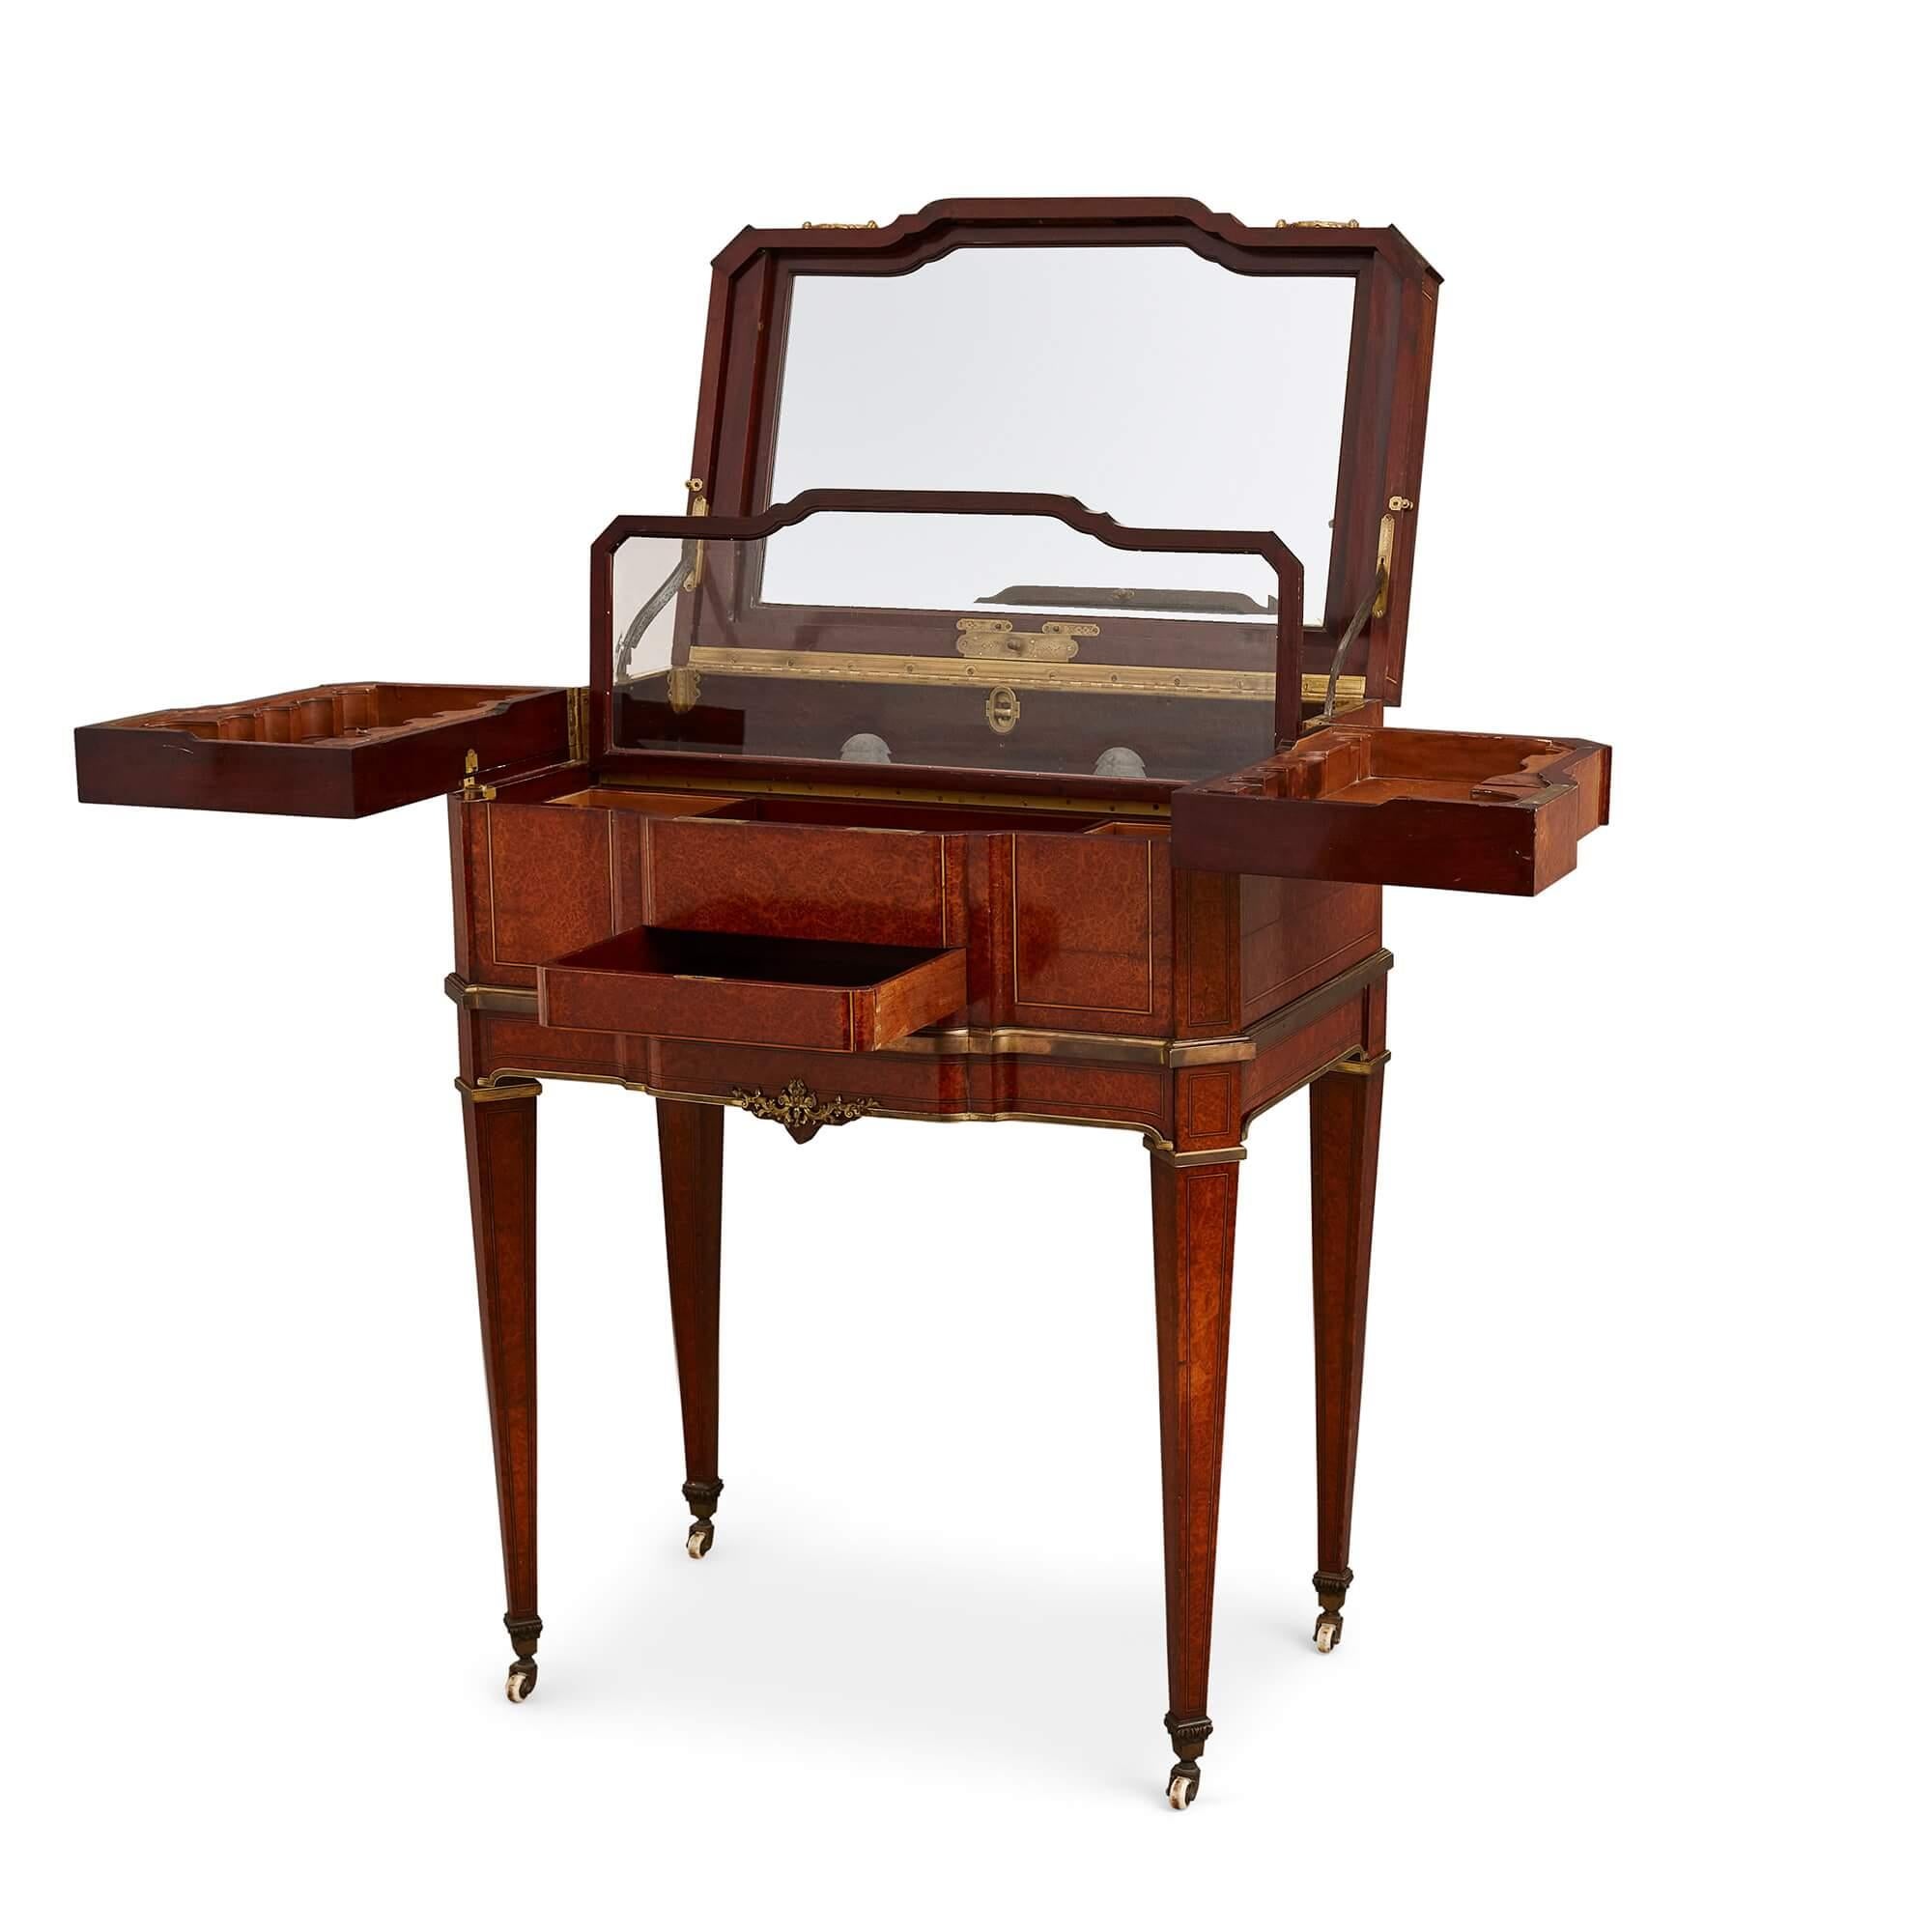 Ormolu mounted amboyna and mahogany Louis XVI style antique dressing table
French, late 19th century
Measures: height 91cm, width 70cm, depth 44.5cm

Beautiful crafted from an array of precious, richly veneered woods and mounted with elegant